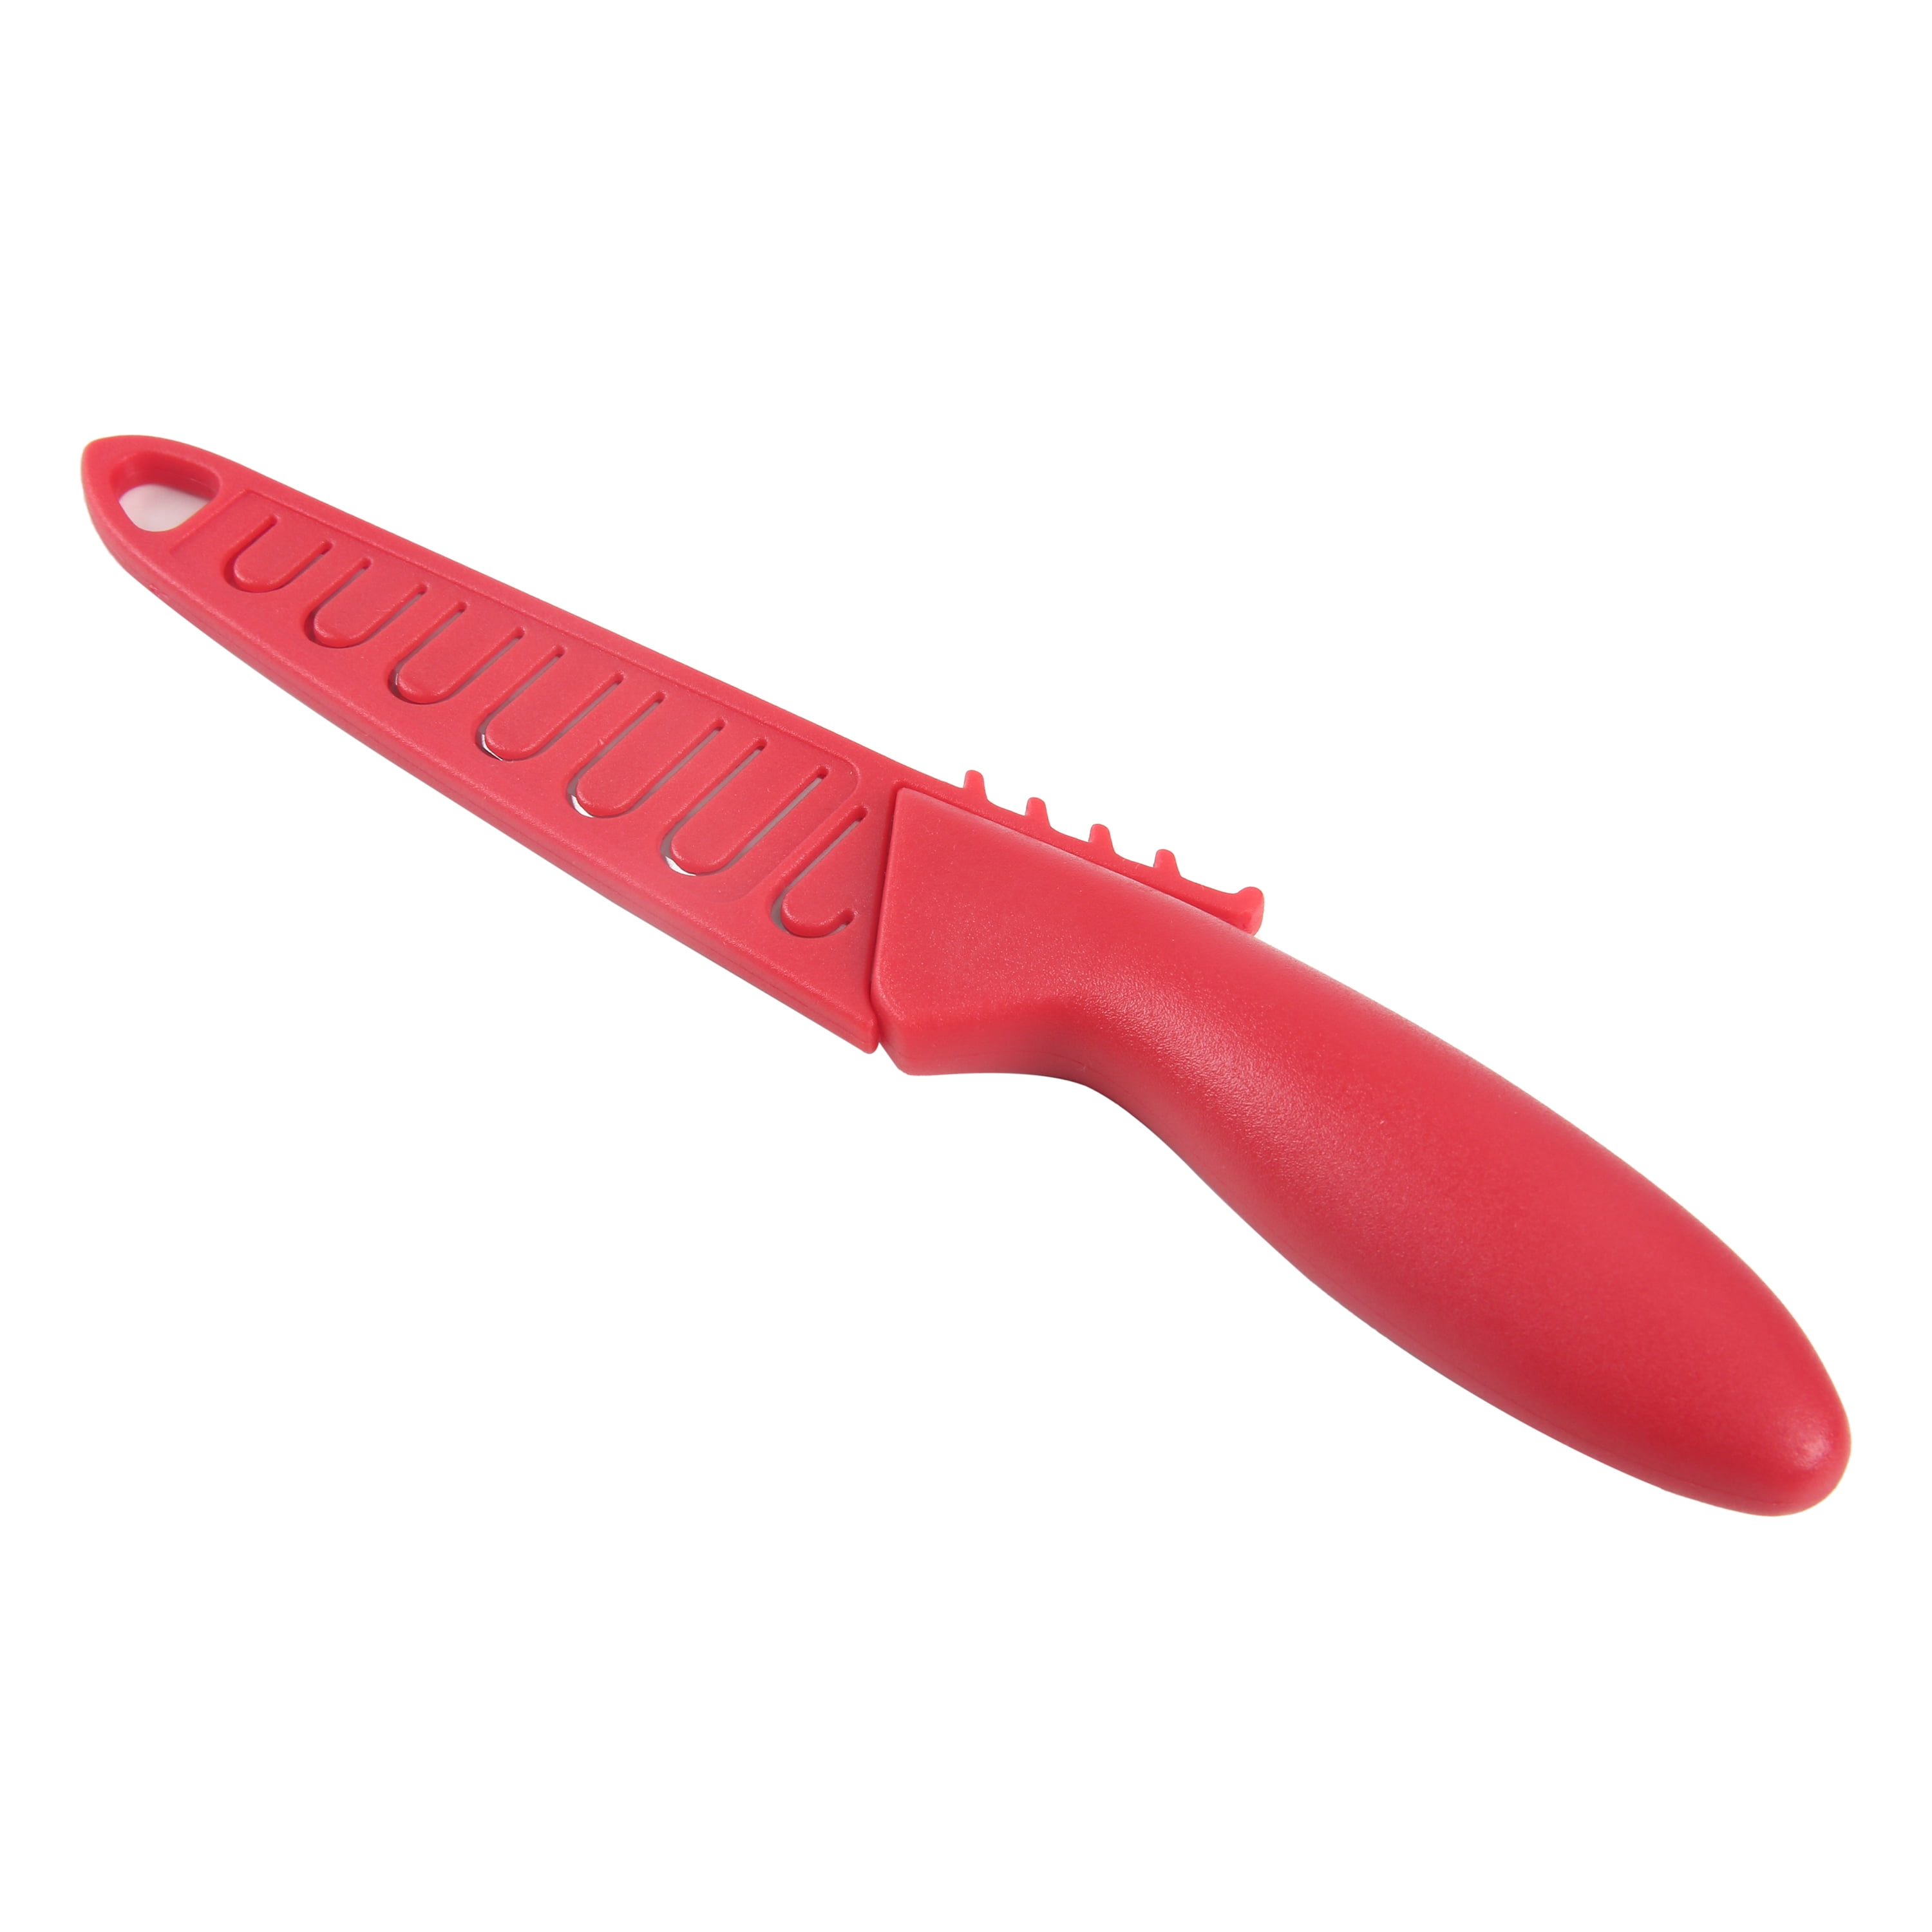 Top Cutlery German Paring Knife 3.25 Stainless Micro Serrated Blade, Red  Handle - KnifeCenter - TC17343R